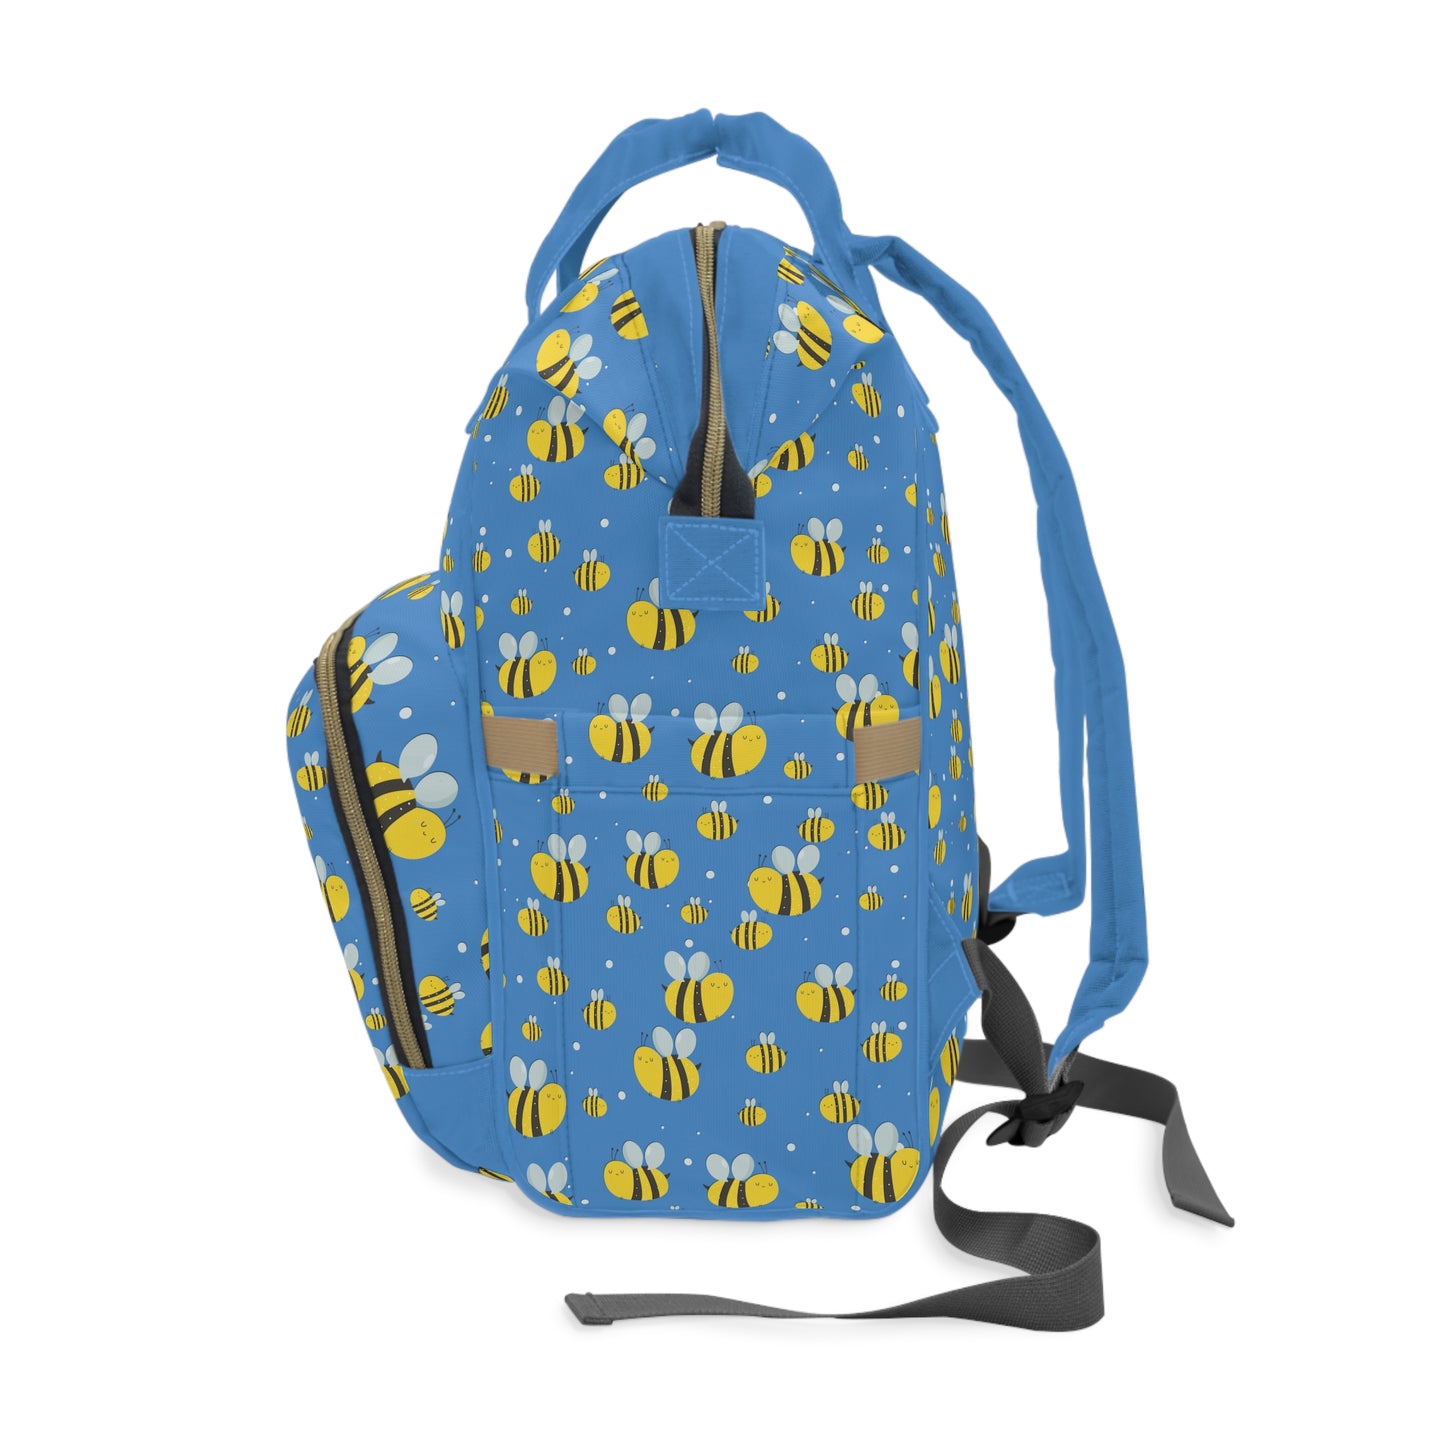 Lots of Bees - Blue #139aff  - large print - Multifunctional Diaper Backpack